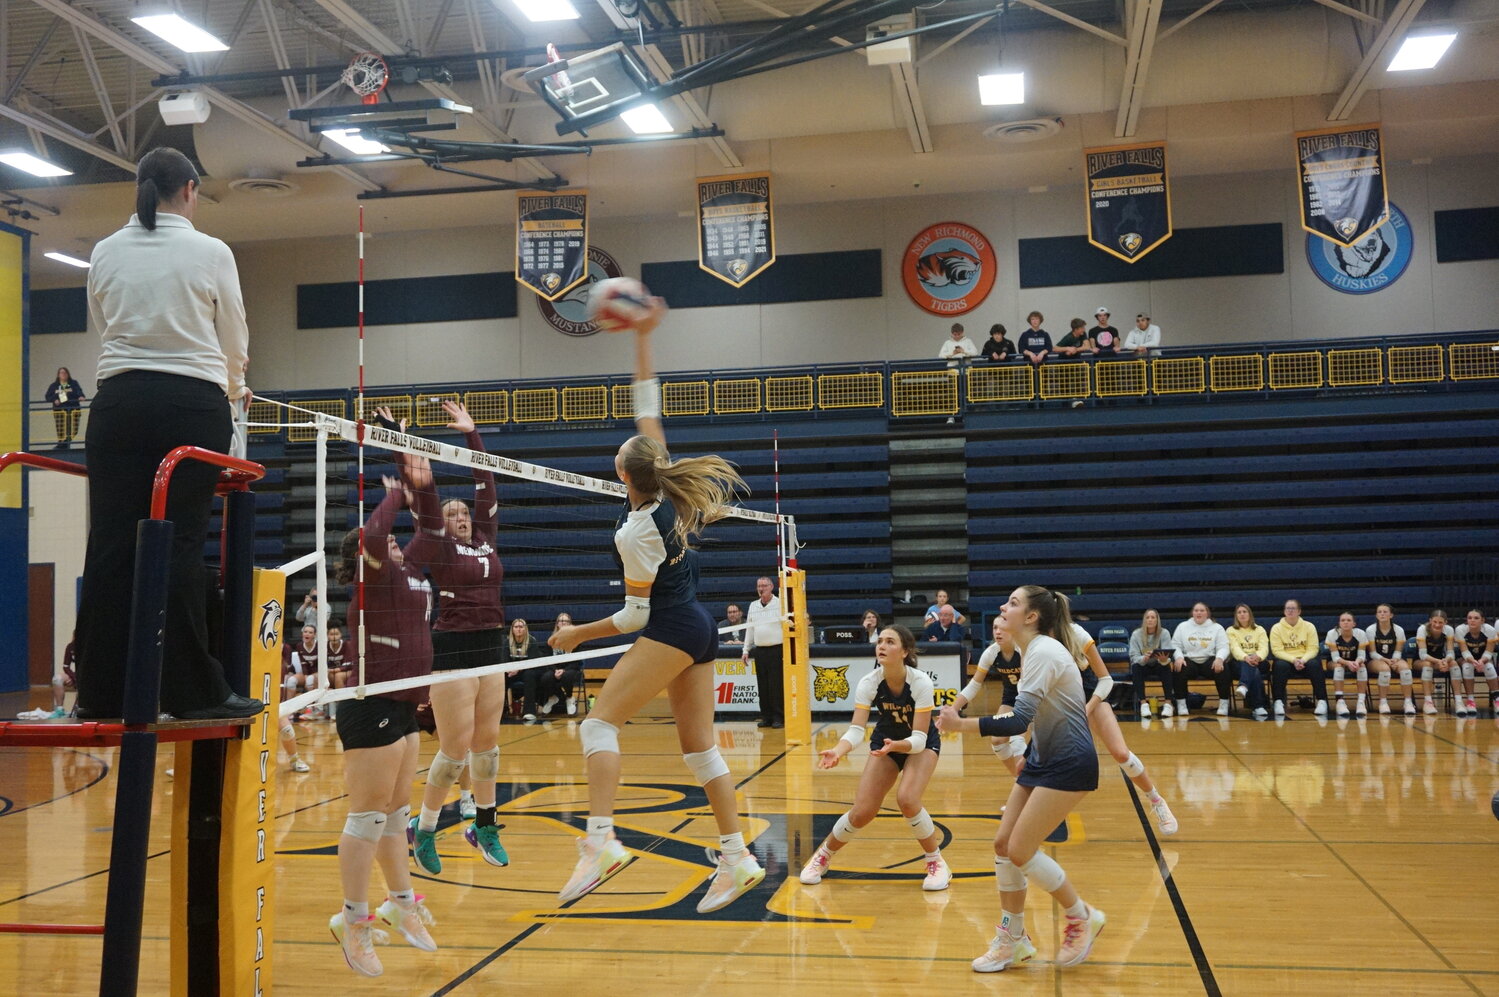 Amelie Pankonin goes up for the serve in the State Championship Tournament in Green Bay on Thursday.